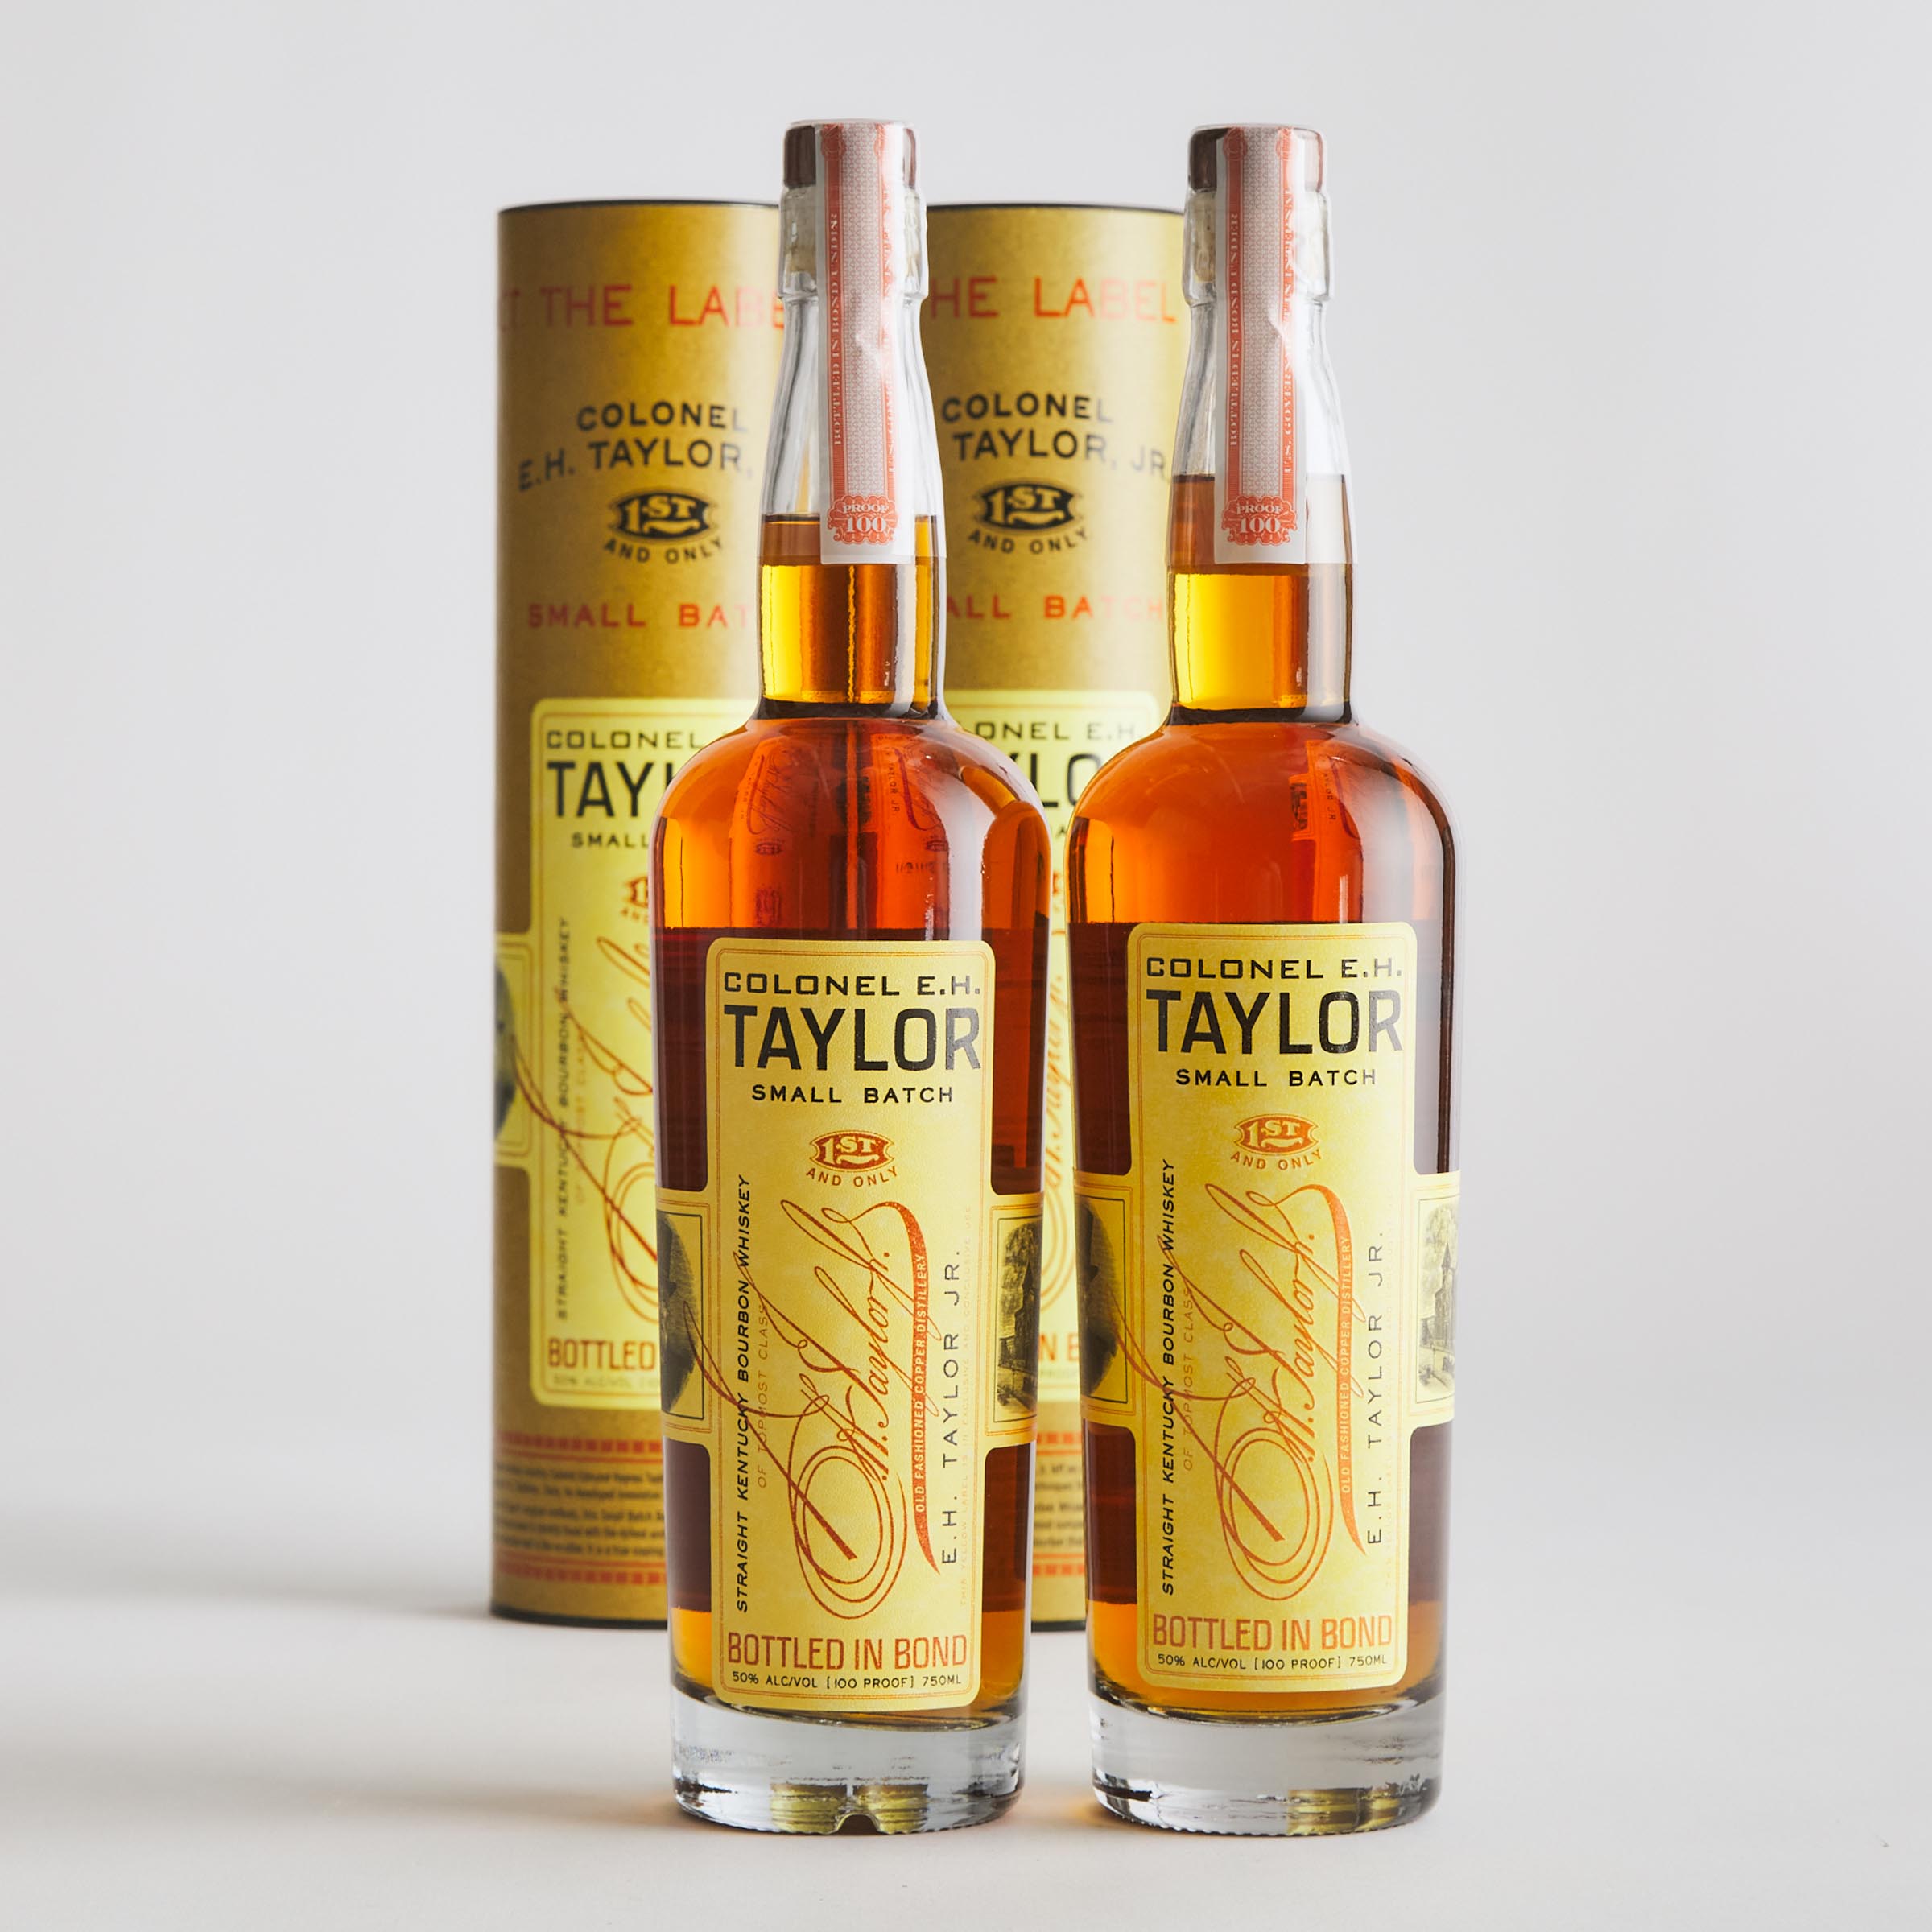 COLONEL E.H.TAYLOR JR. SMALL BATCH STRAIGHT KENTUCKY BOURBON WHISKEY NAS (TWO 750 ML)